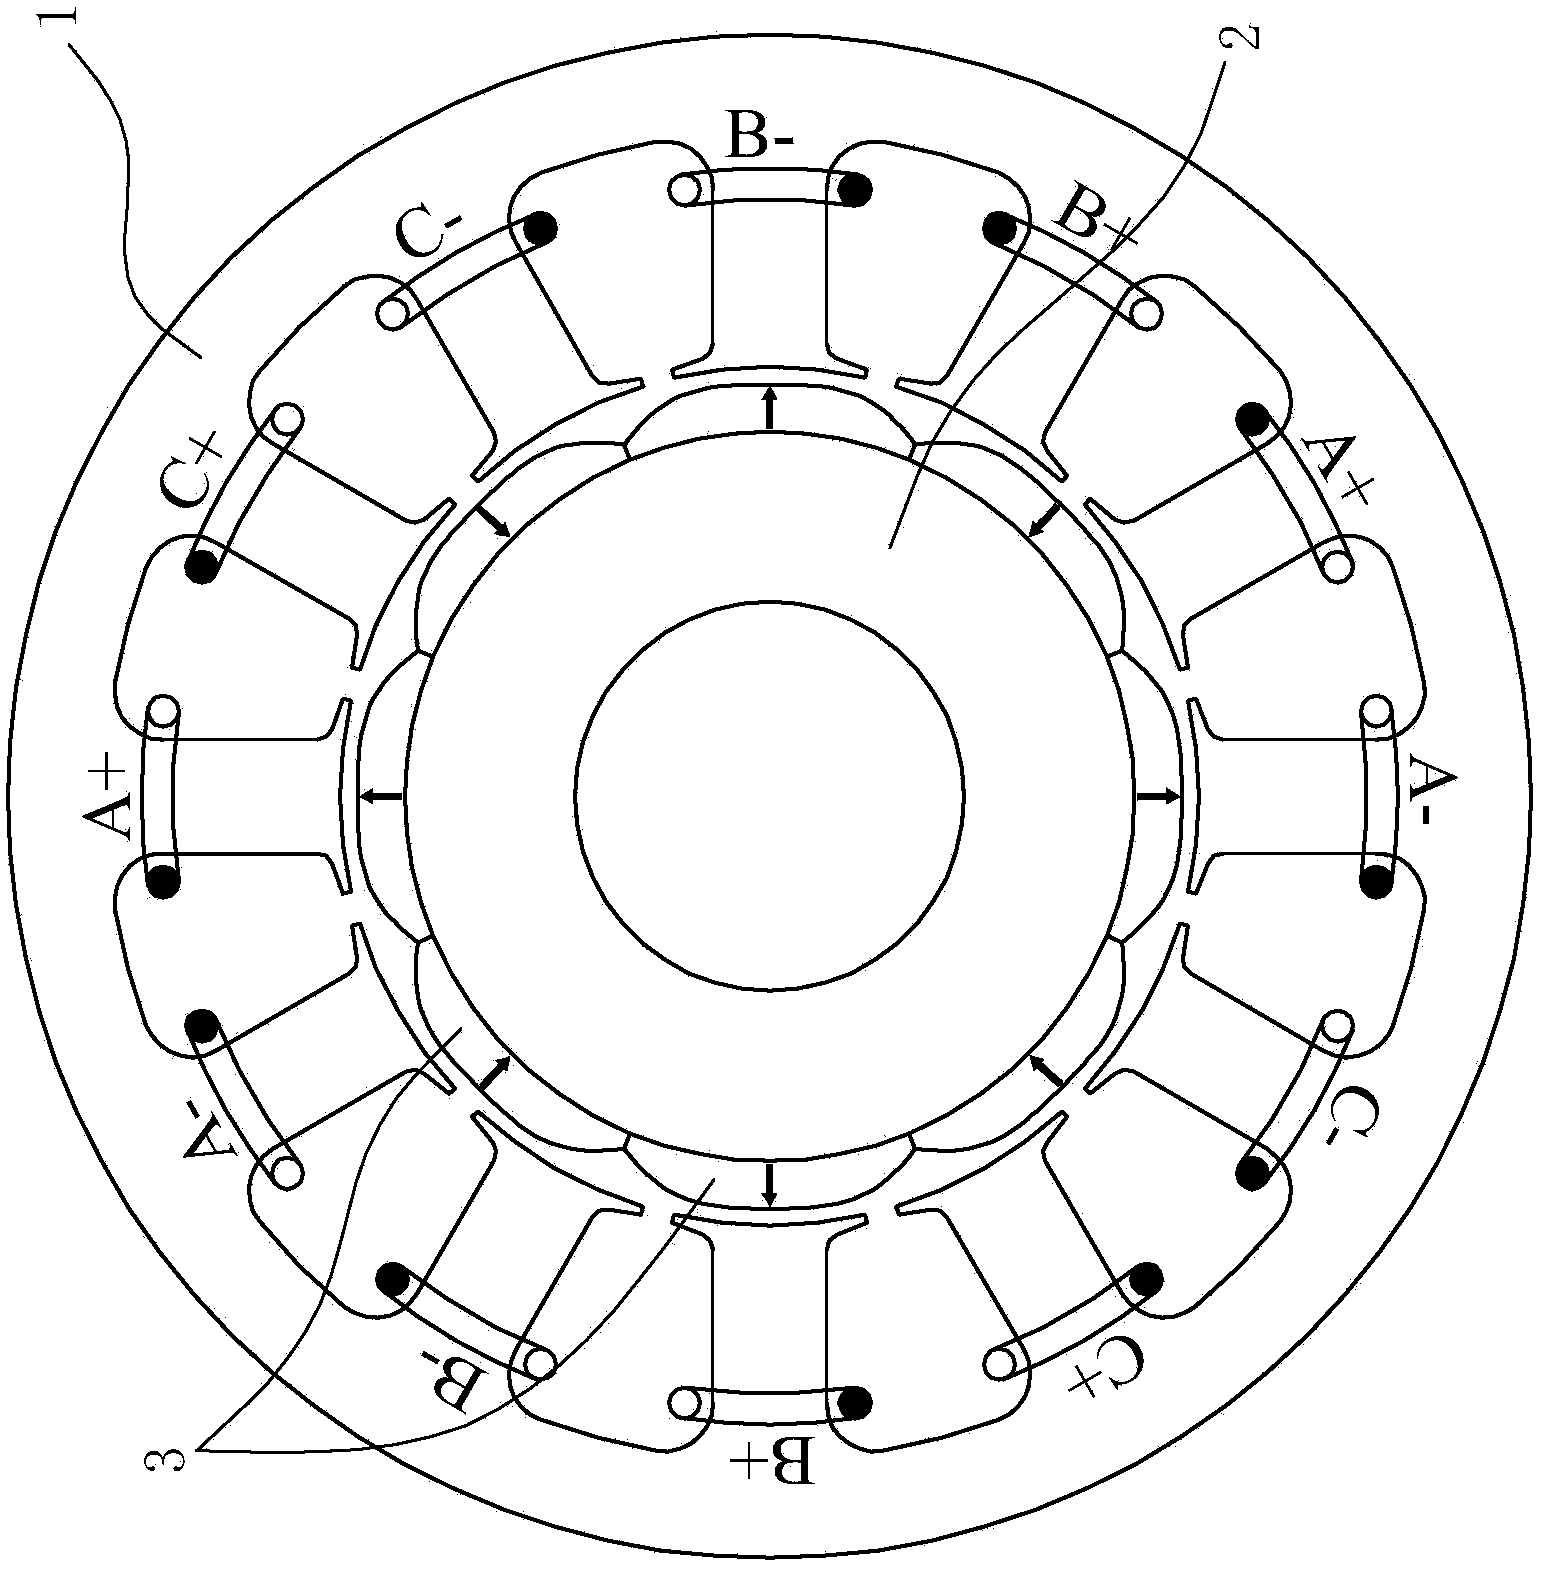 Permanent magnet for motor and design method thereof